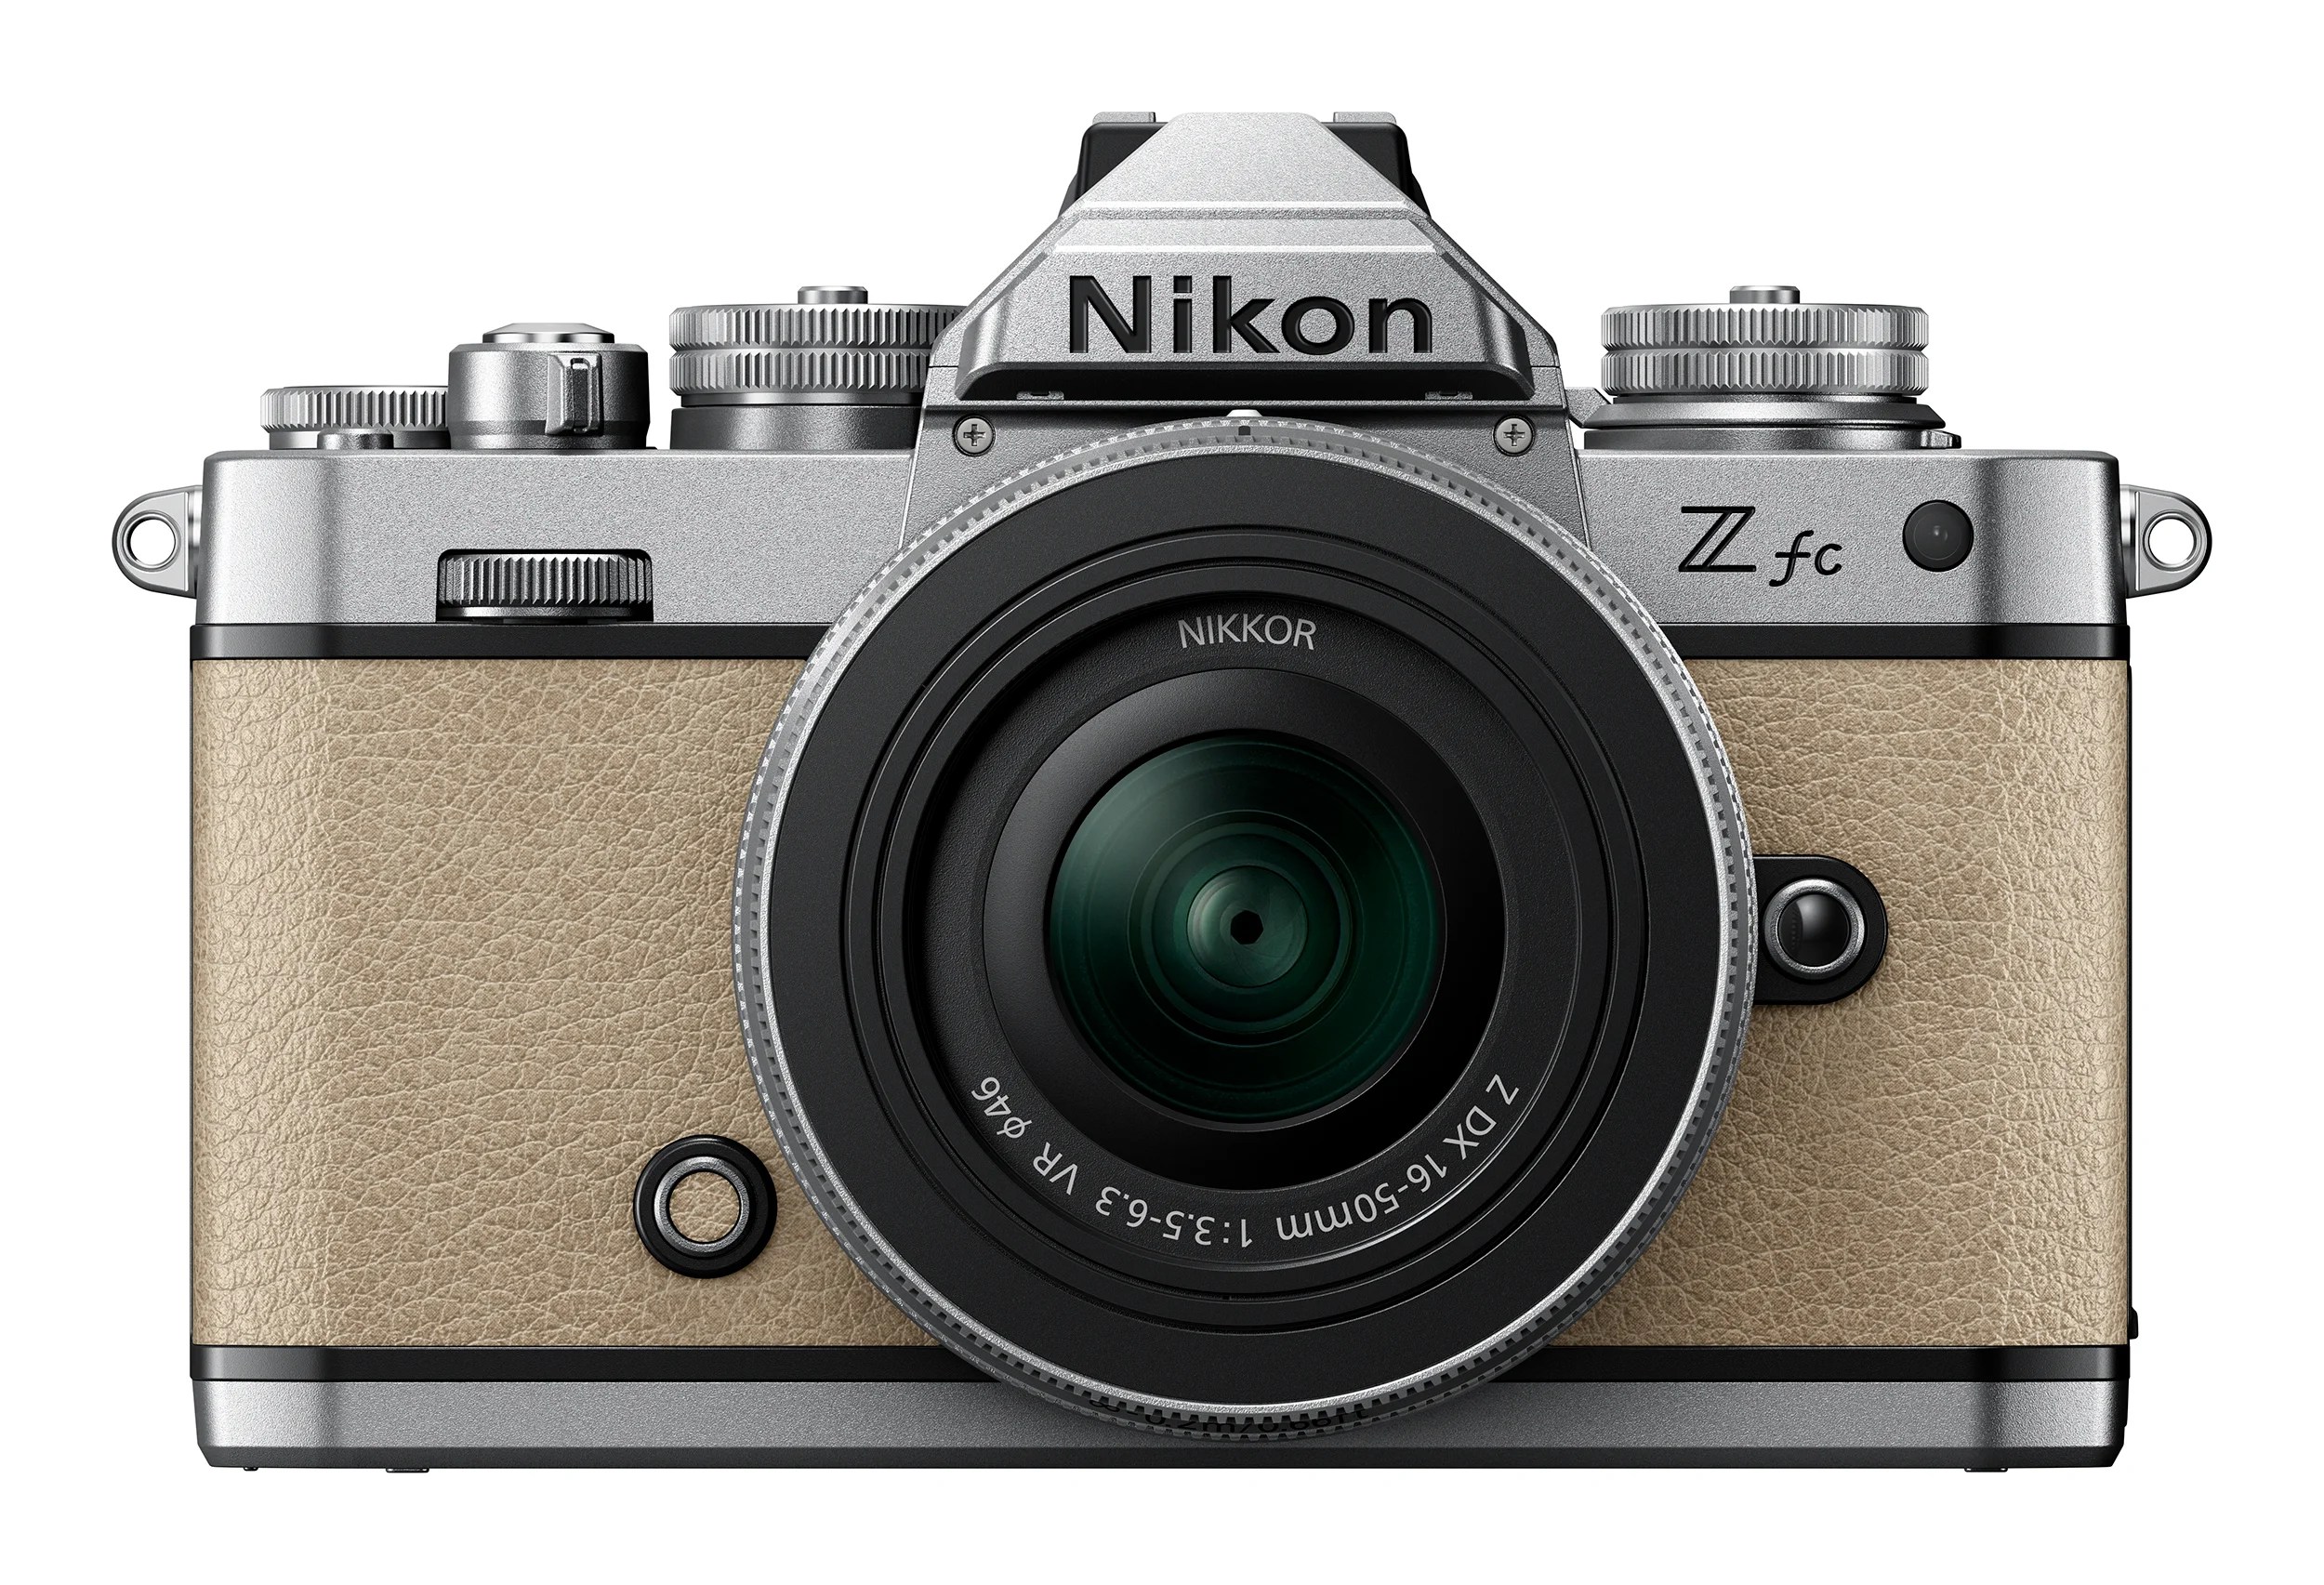 The Nikon Z Fc draws inspiration from one of the best film